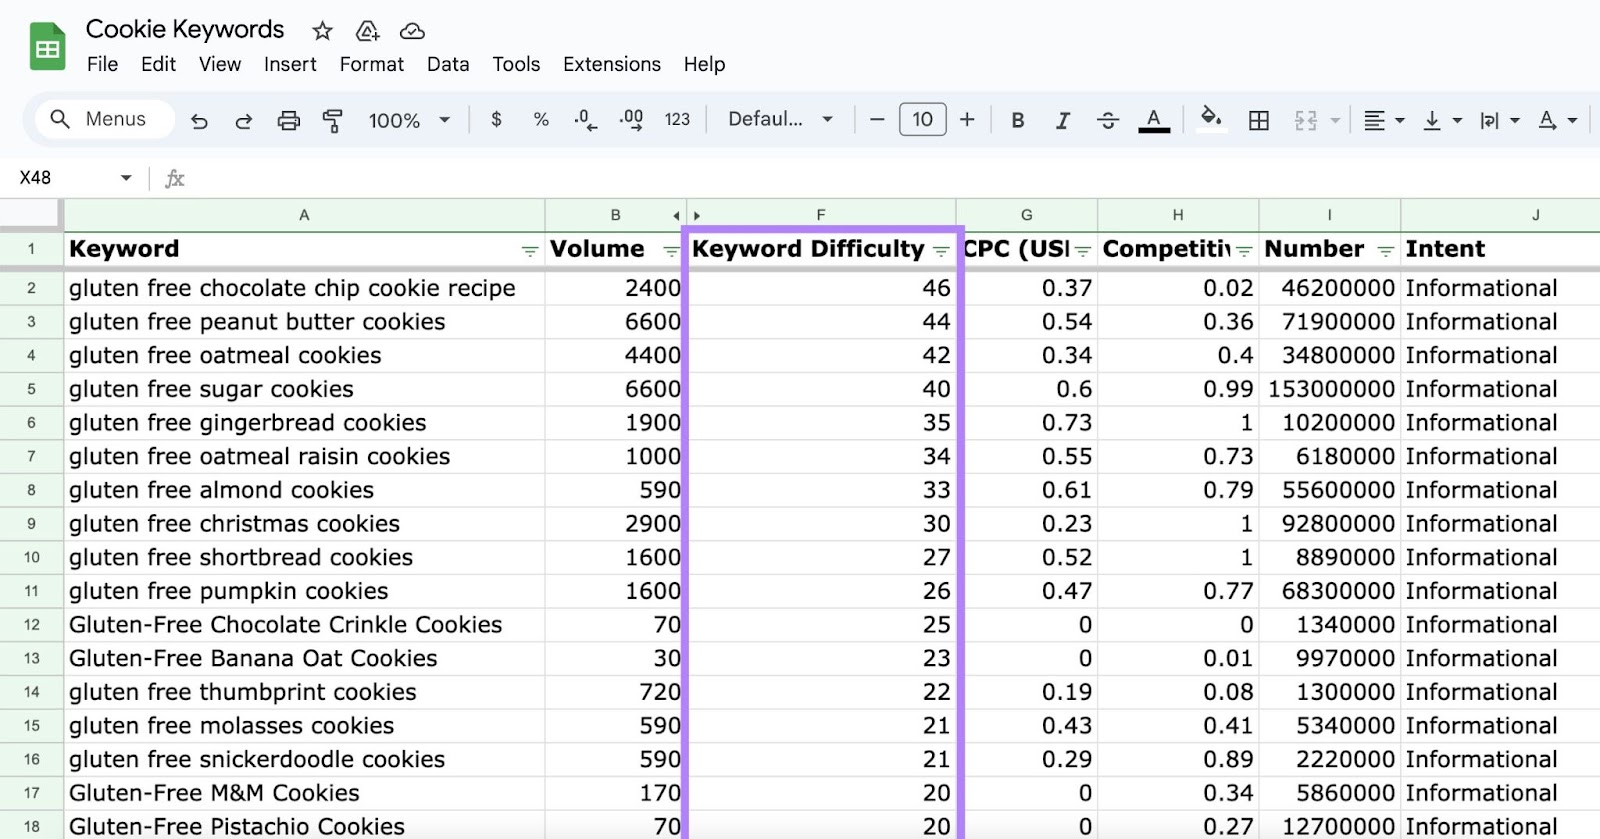 "Keyword Difficulty" column highlighted in the "Cookie Keywords" spreadsheet